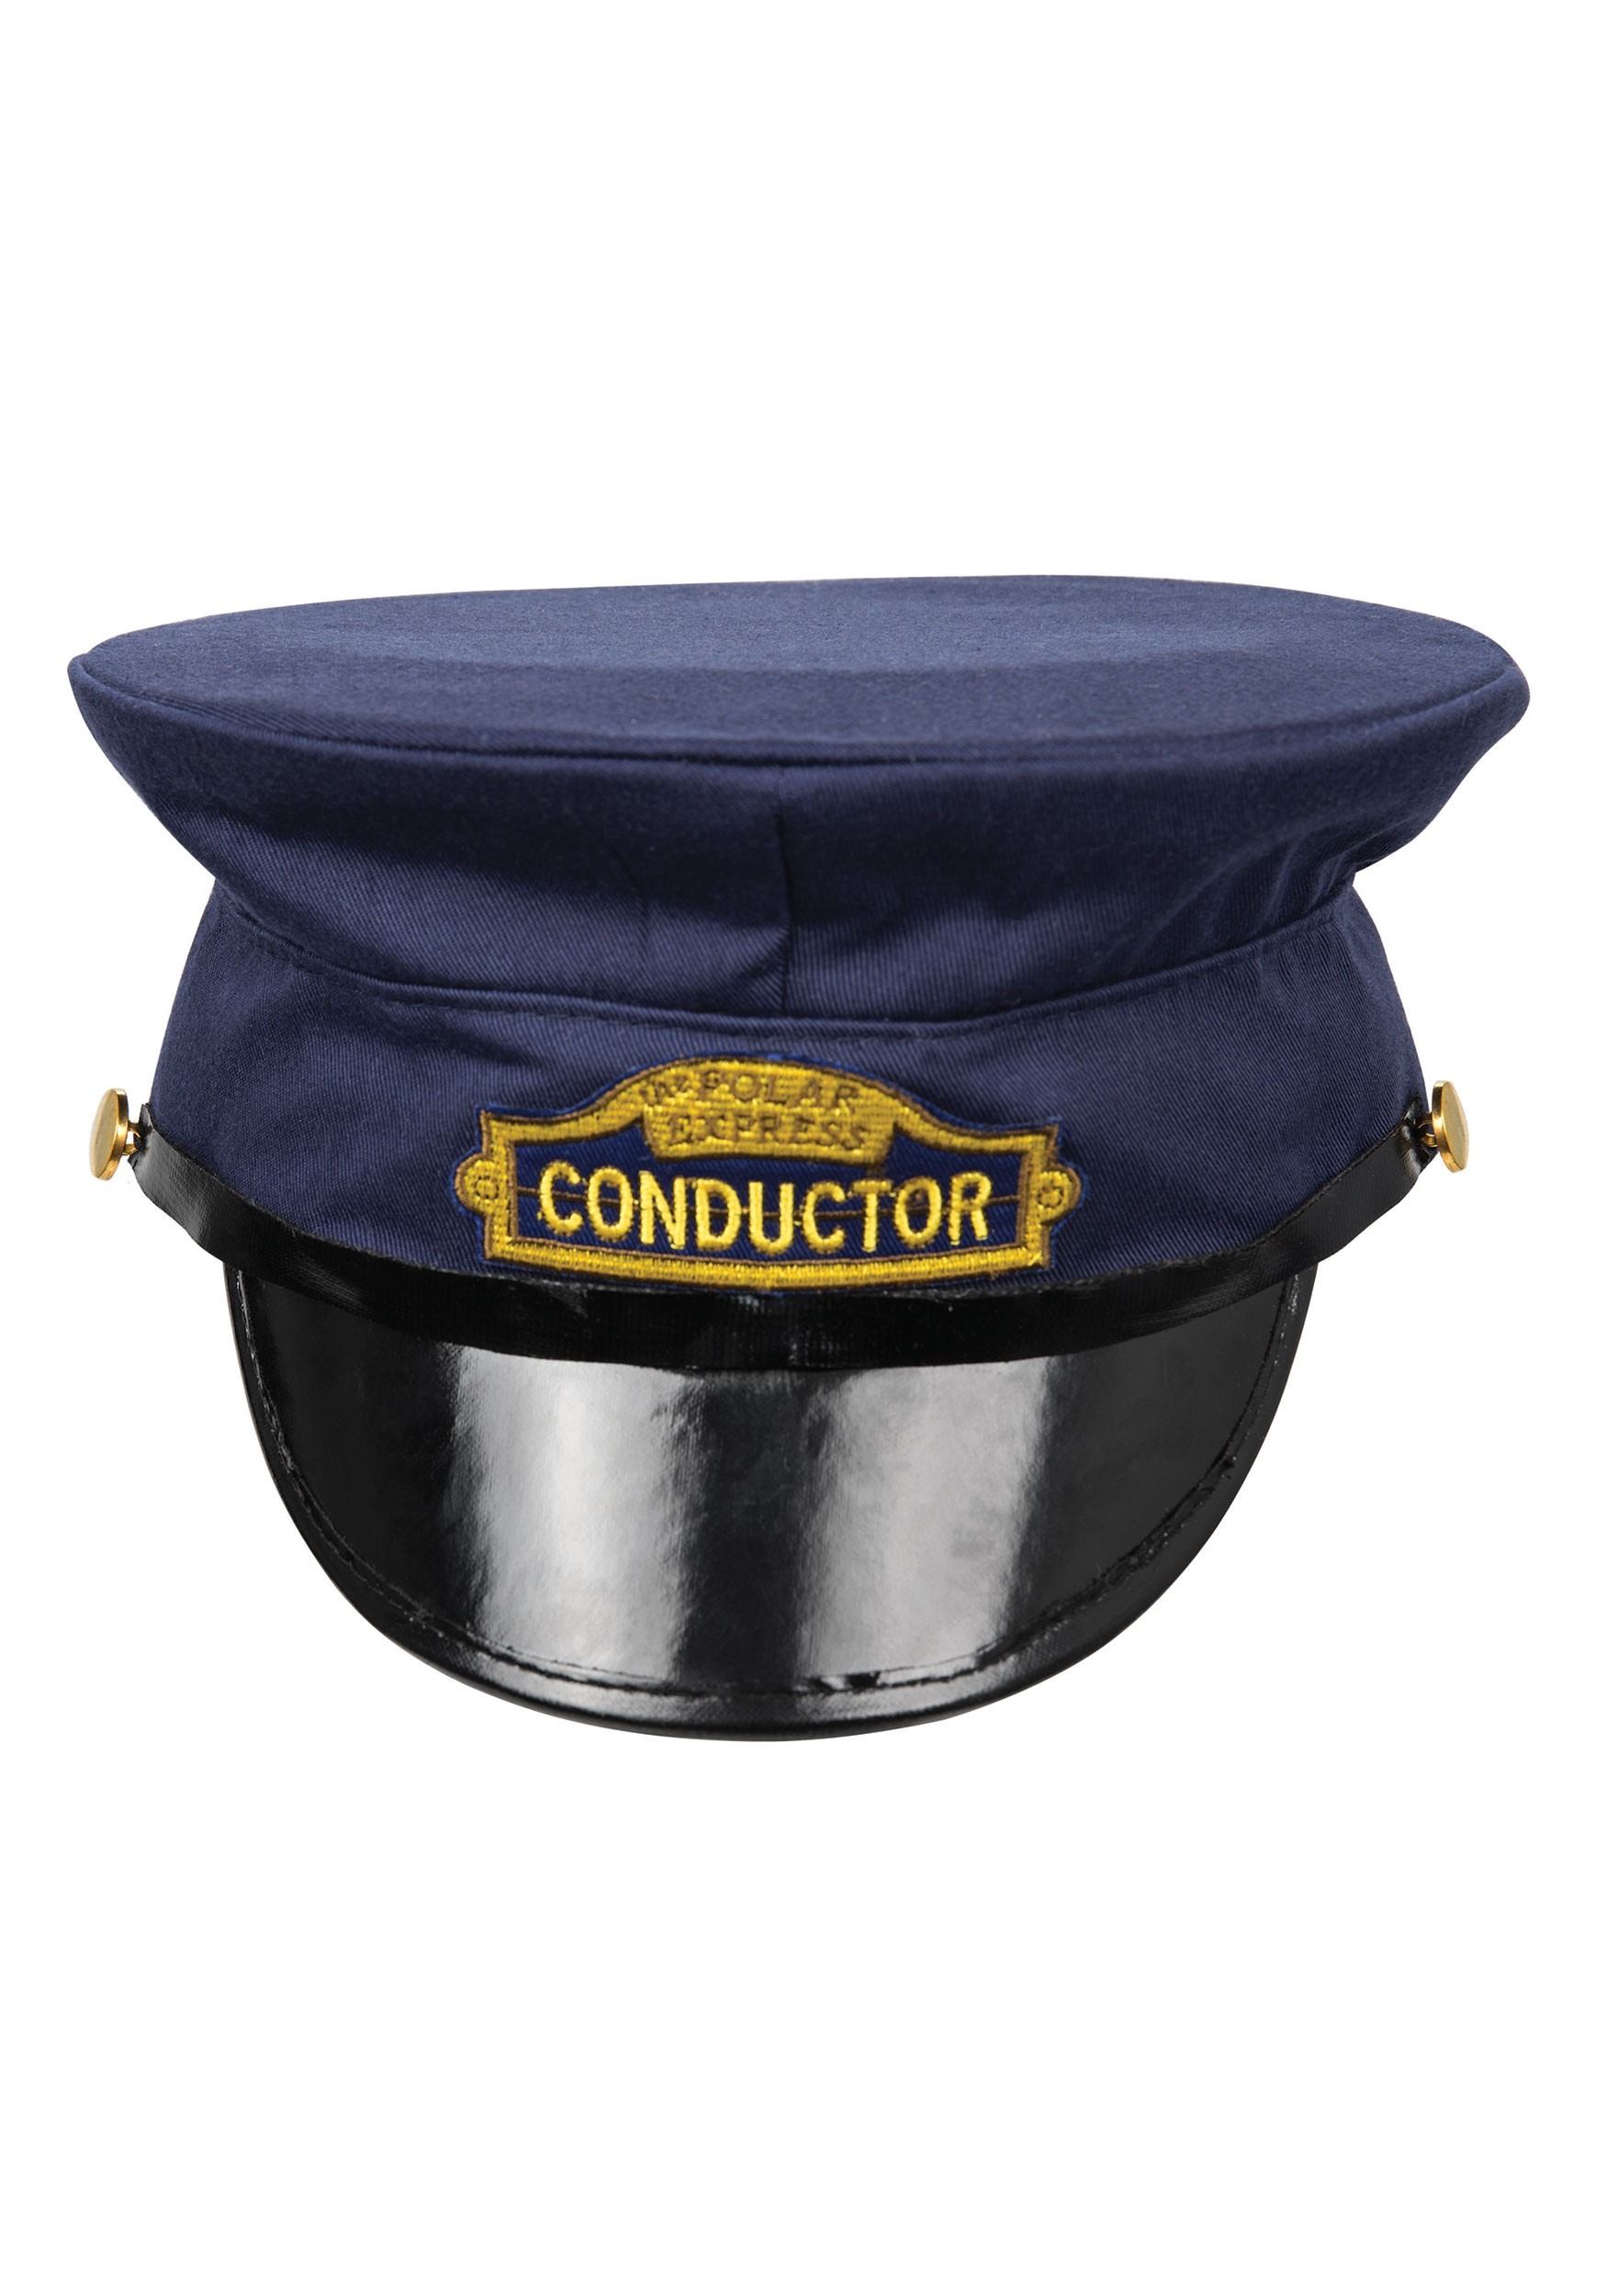 Lionel Officially Licensed Polar Express Conductor Hat